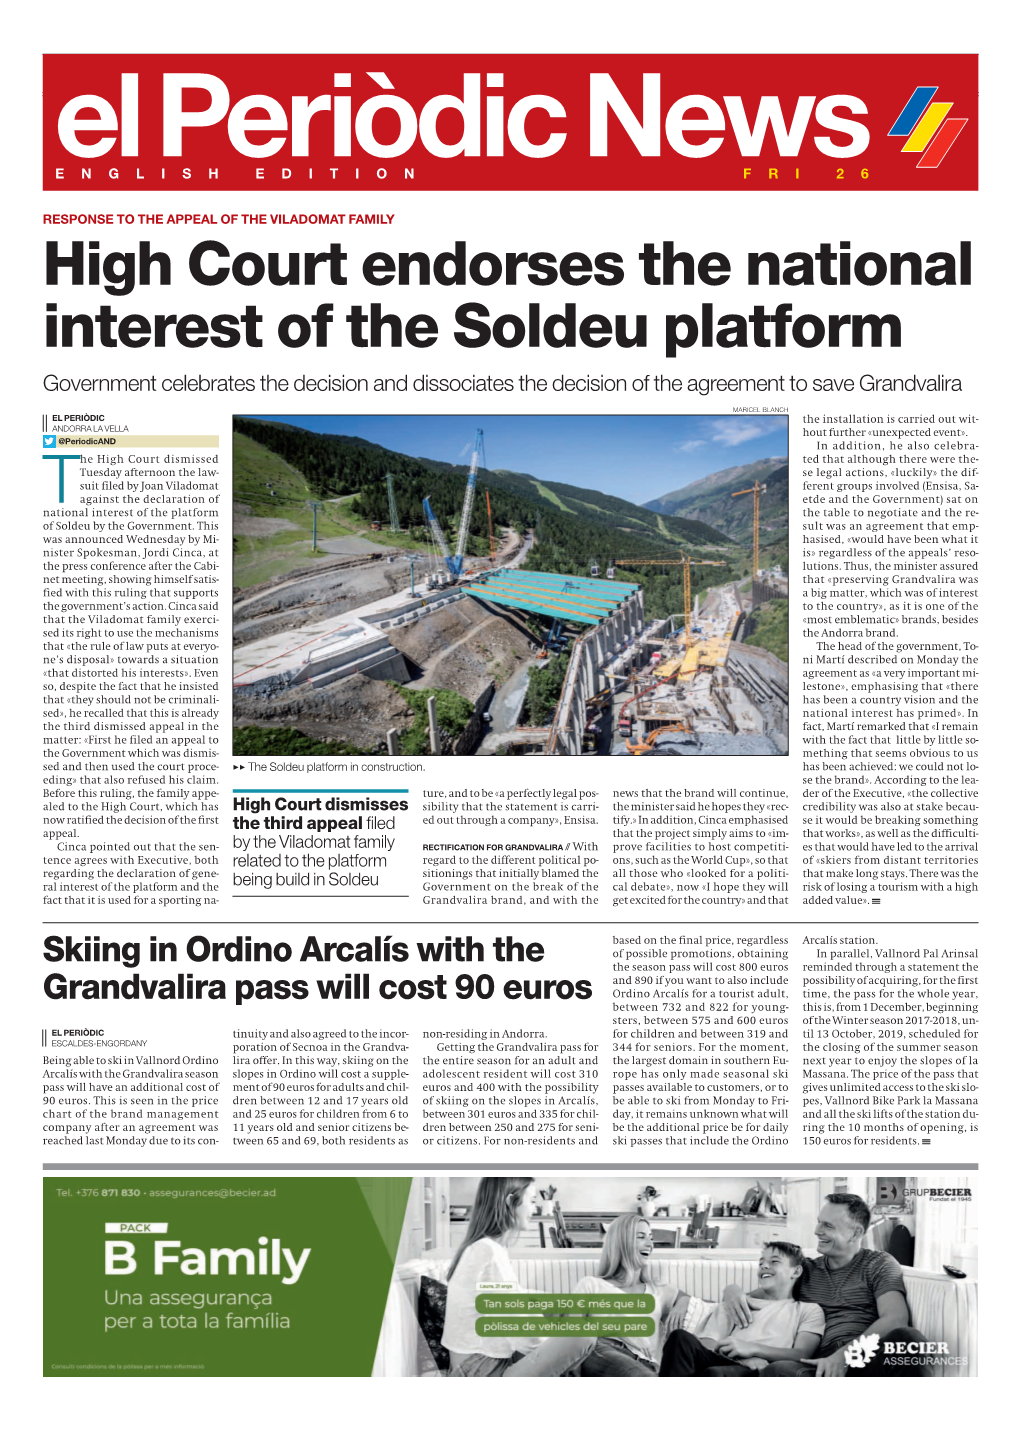 High Court Endorses the National Interest of the Soldeu Platform Government Celebrates the Decision and Dissociates the Decision of the Agreement to Save Grandvalira